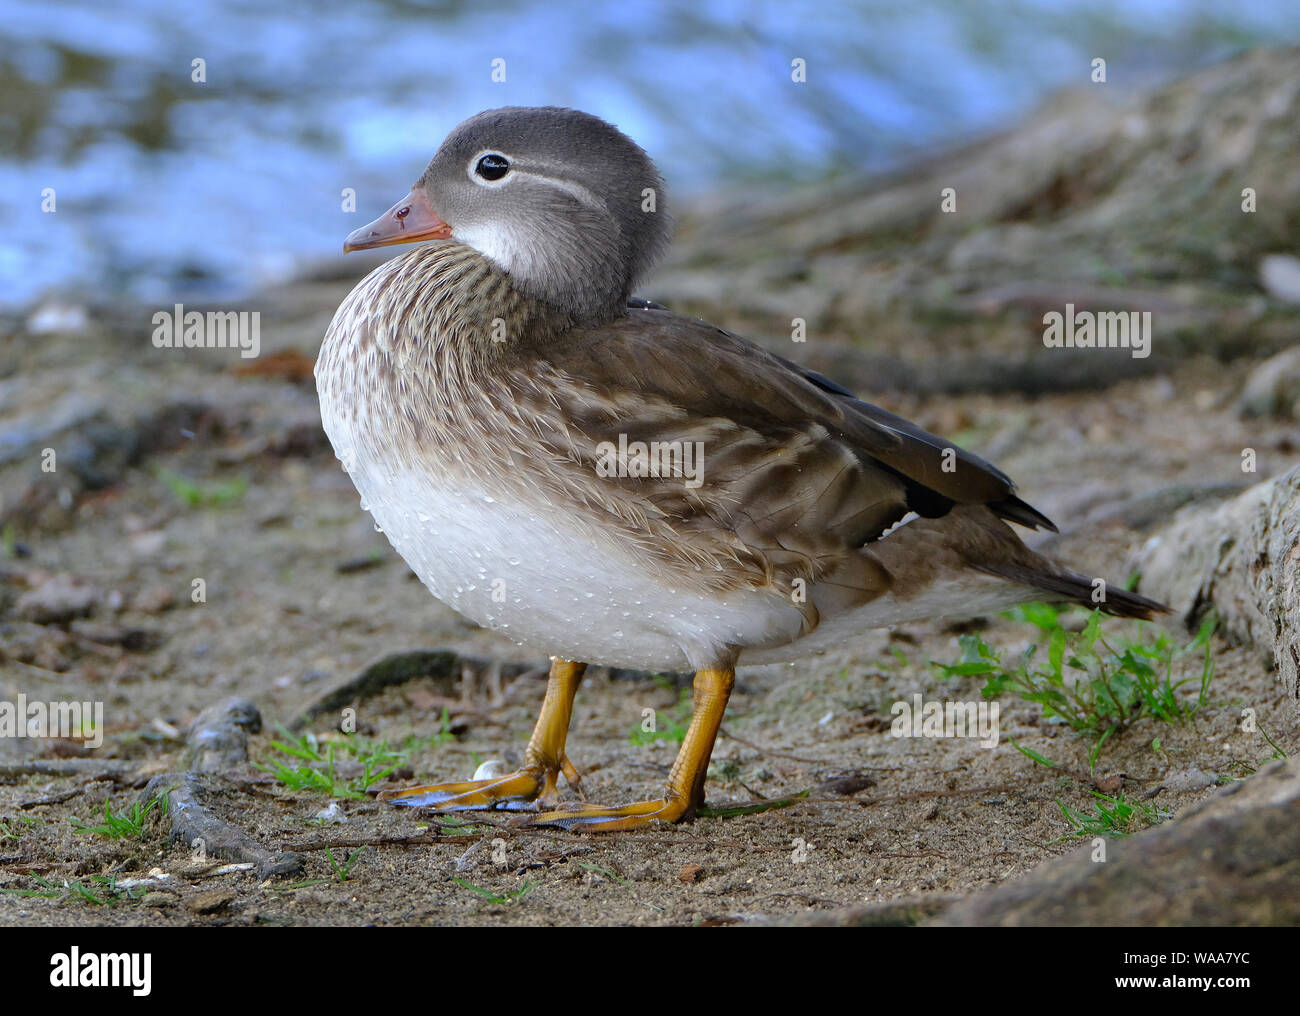 Female mandarin duck. The mandarin duck is a perching duck species native to East Asia. Stock Photo